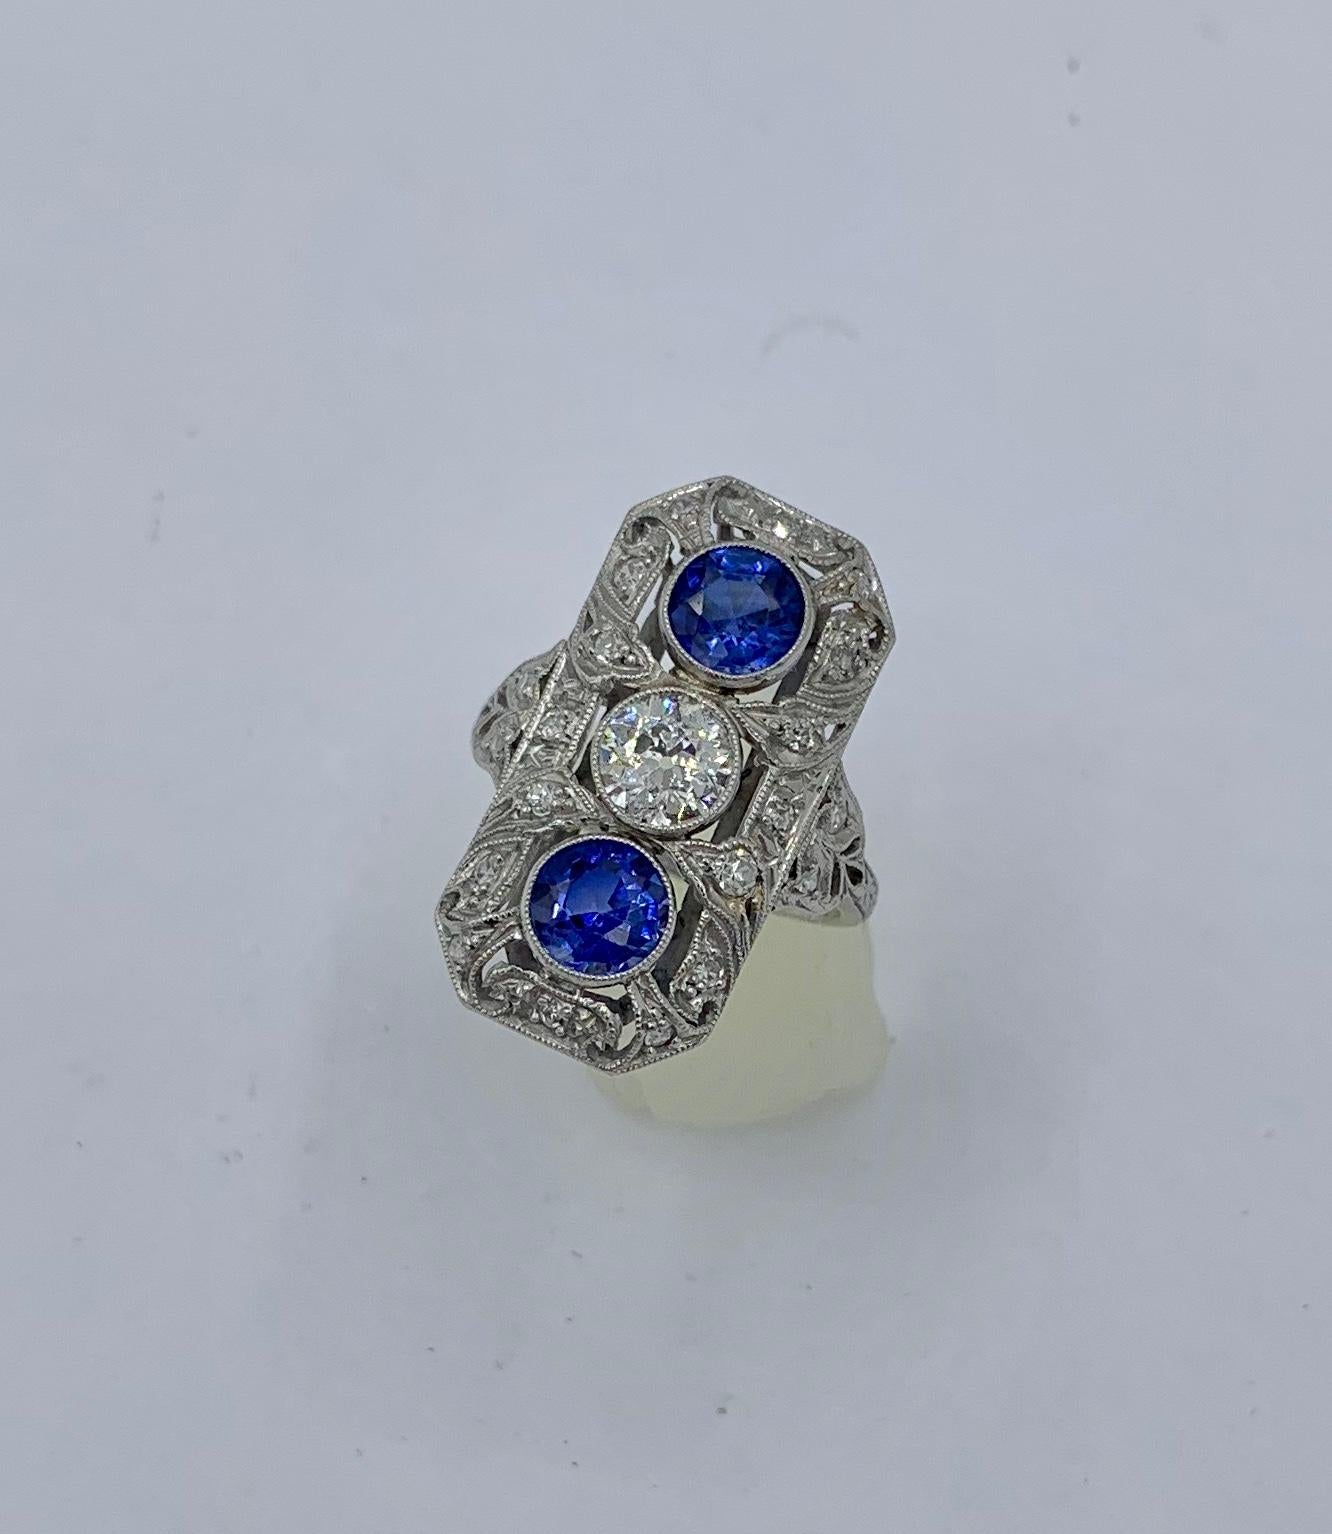 This is an absolutely stunning Diamond Sapphire Platinum Antique Art Deco - Victorian Wedding Engagement Ring.  The rectangular panel design Platinum setting is gorgeous with exquisite open work, milgrain beaded borders, and set throughout with